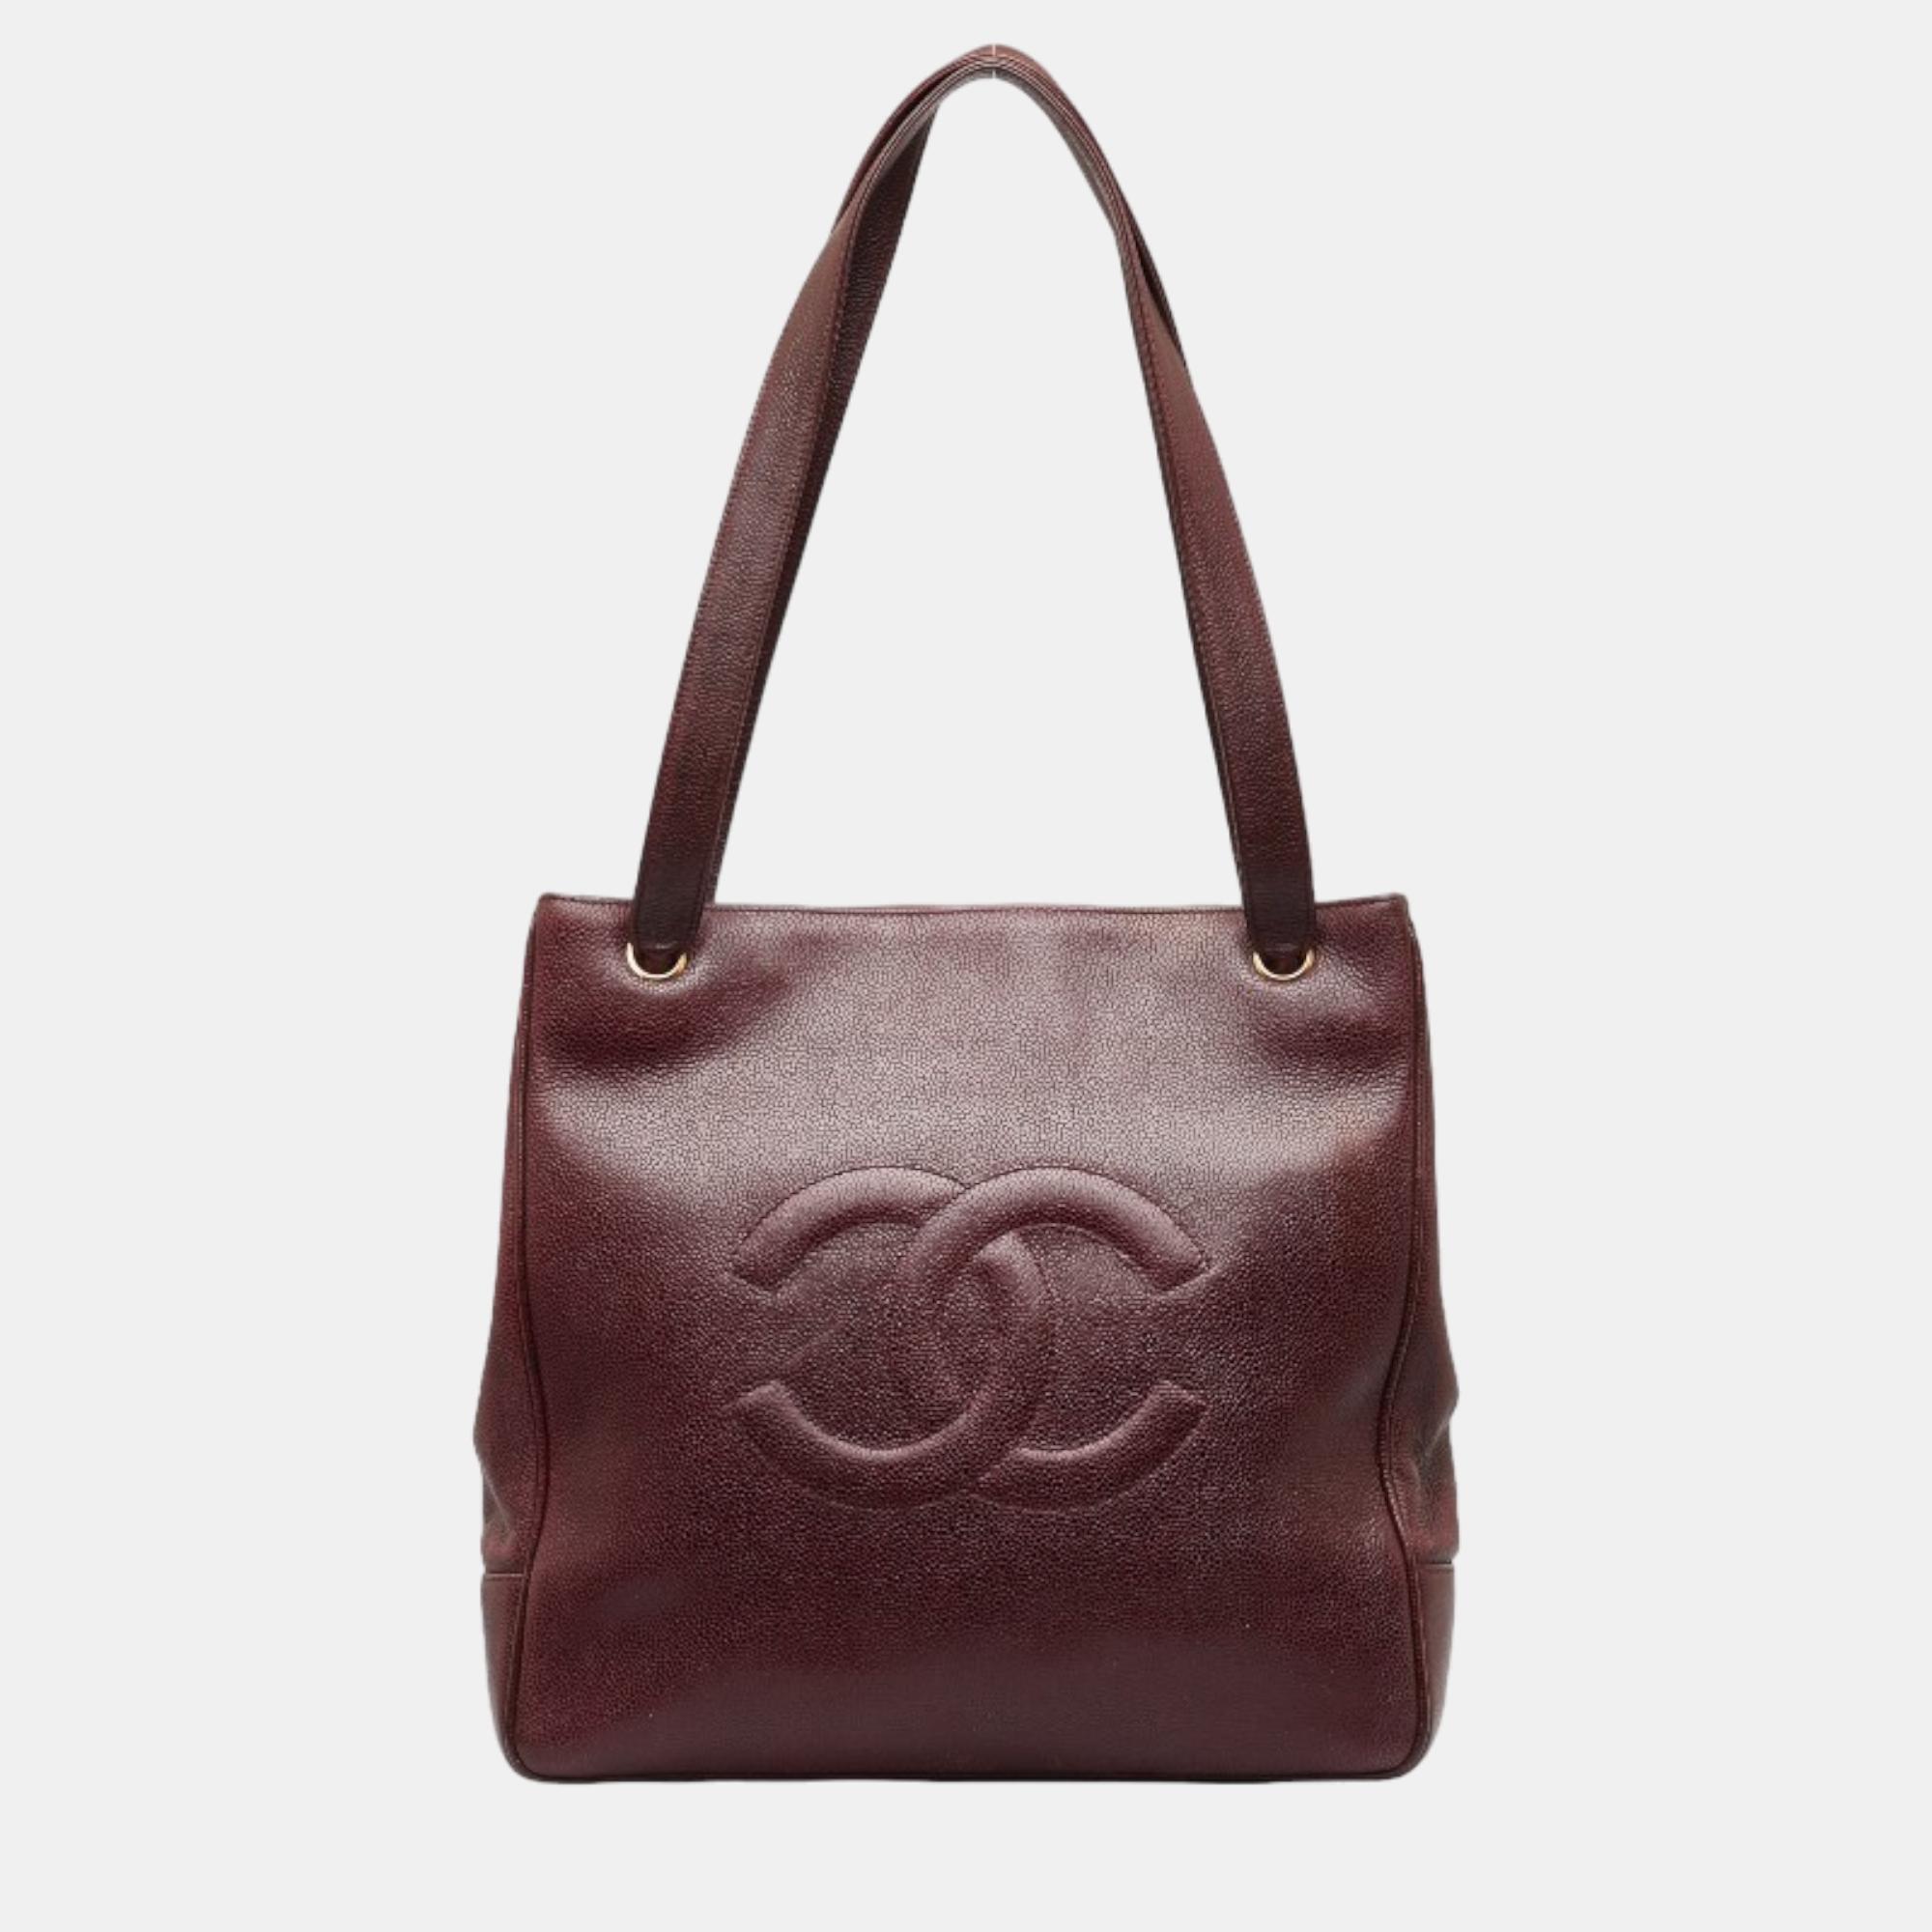 Chanel burgundy leather  cc timeless tote